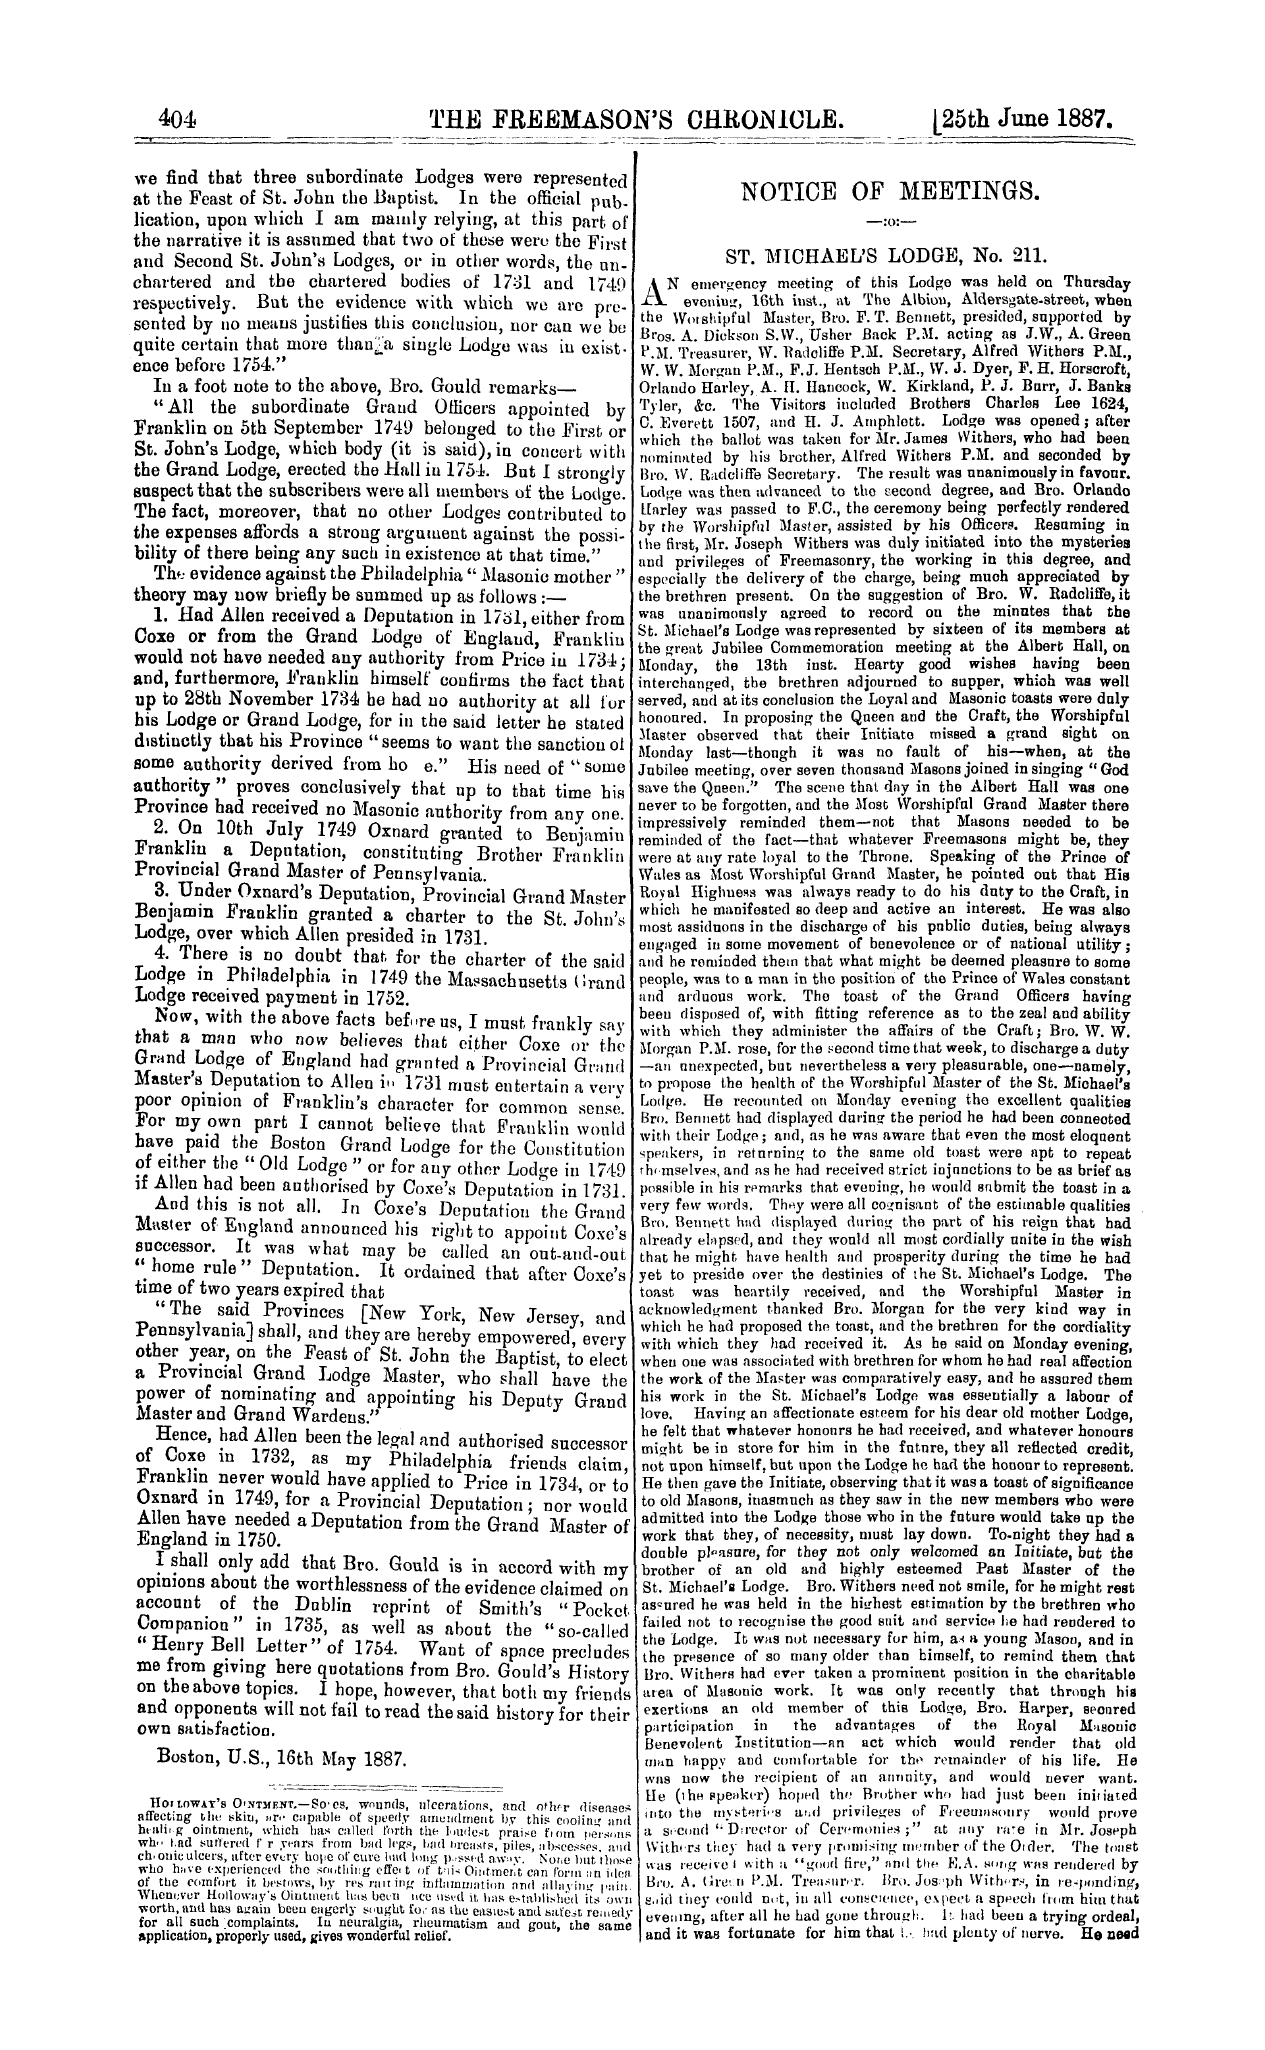 The Freemason's Chronicle: 1887-06-25 - What Dr. Mease And Bro. Gould Say About Philadelphia Masonry.